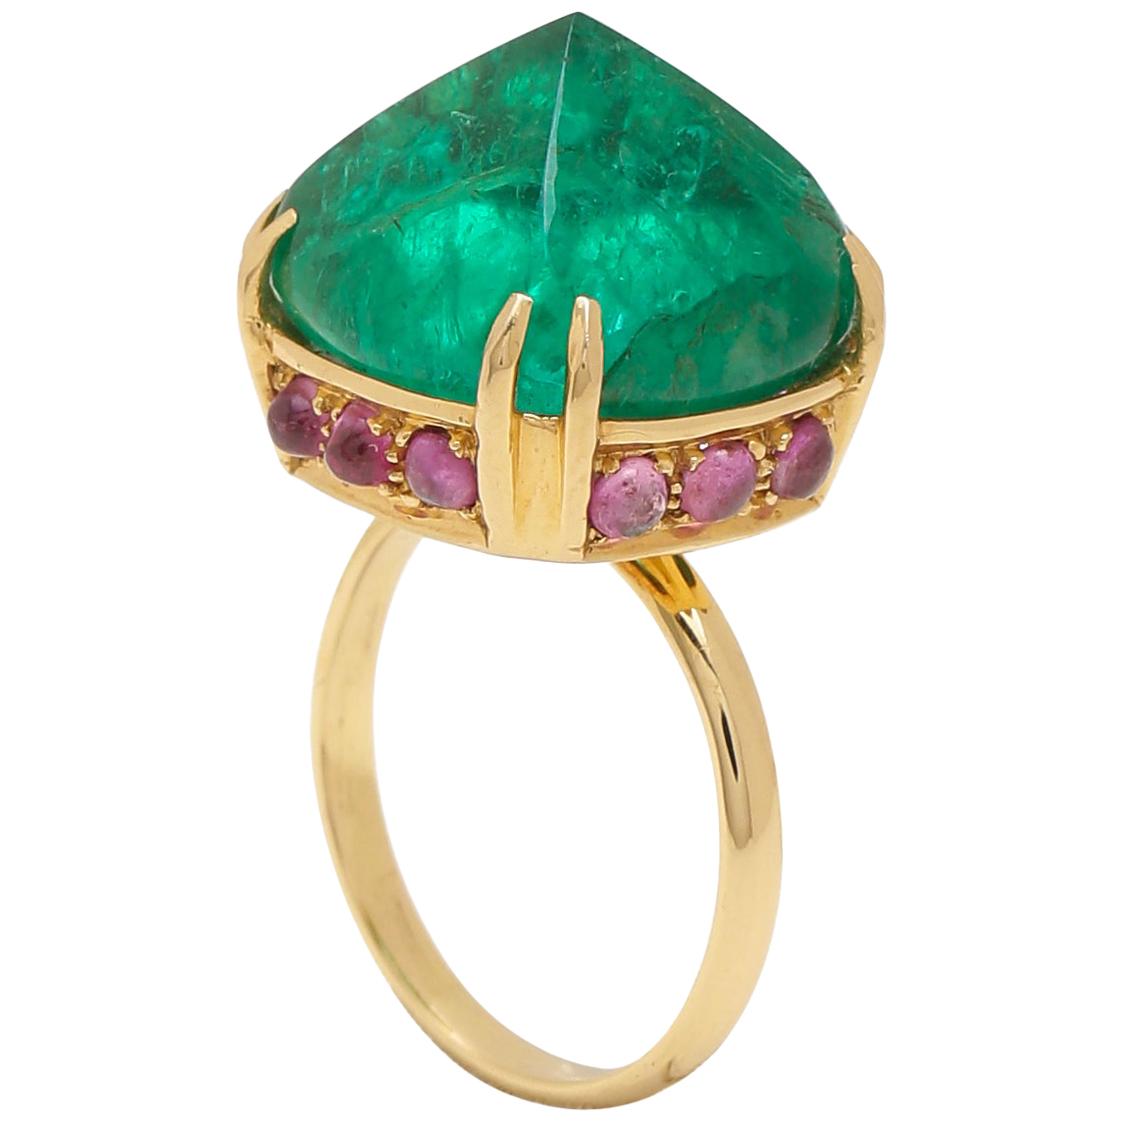 Certified 18.11 Carat Emerald Sugarloaf and Ruby Cabochon Cocktail Ring in Gold